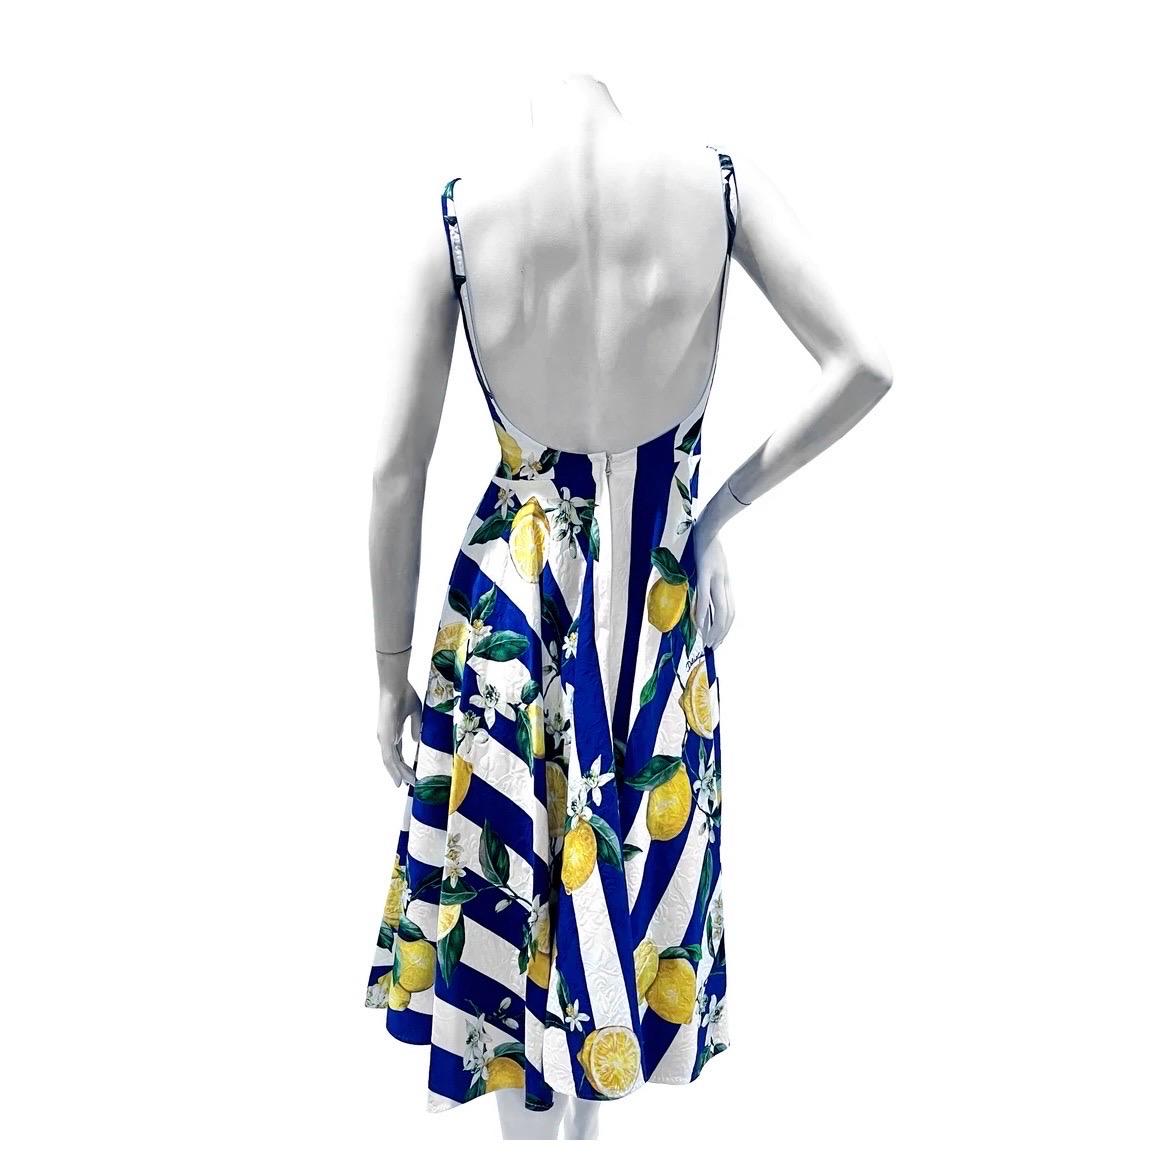 Limoni Print Dress by Dolce & Gabbana
Made in Italy
Royal blue stripes with lemon floral motif
Boatneck
A-line pleated skirt
Open back 
Back zipper closure
Viscose cotton blend, silk lining 
Condition: Excellent condition, no visible wear.
